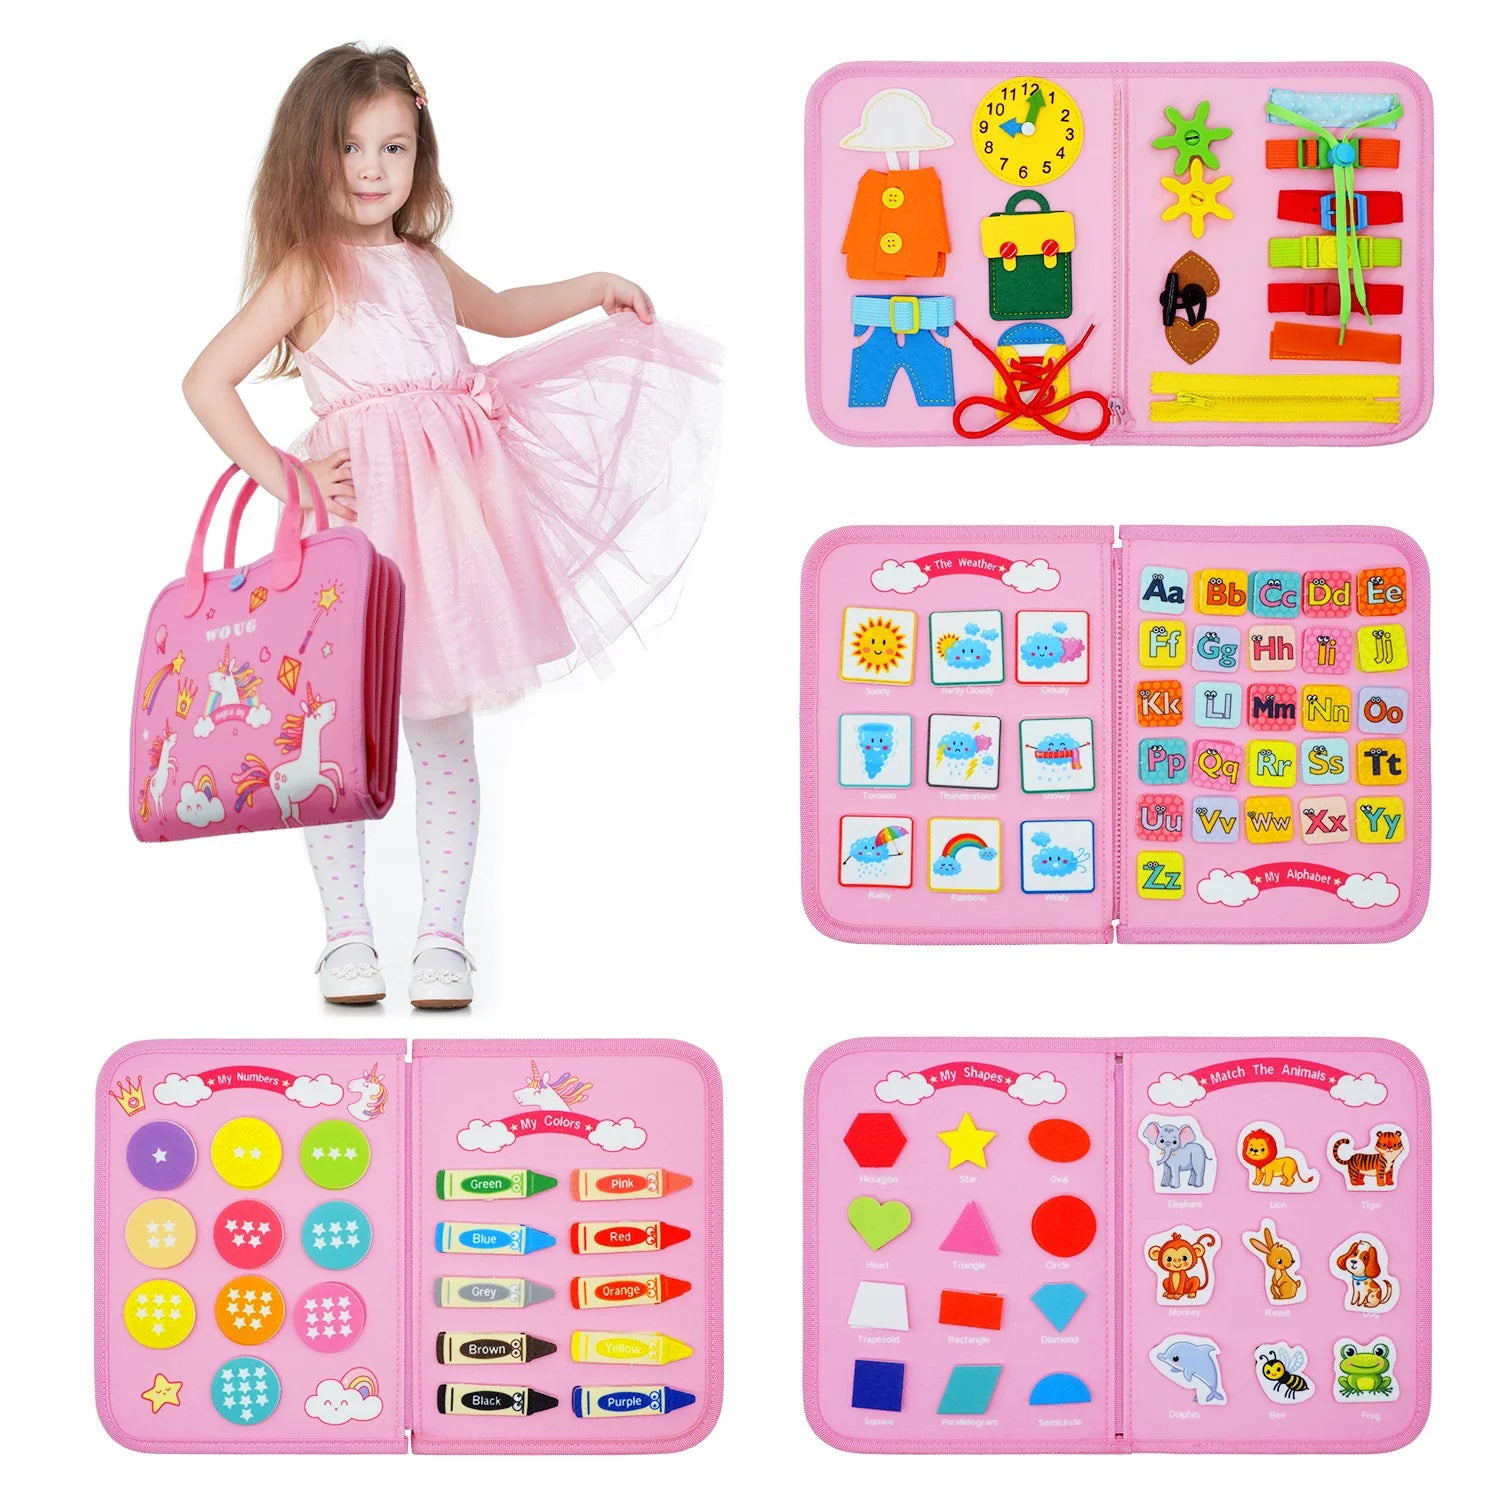 PINK VARIANT WIOTH GIRL Montessori Busy Board™ for Toddlers - Sensory Learning & Motor Skills Toy